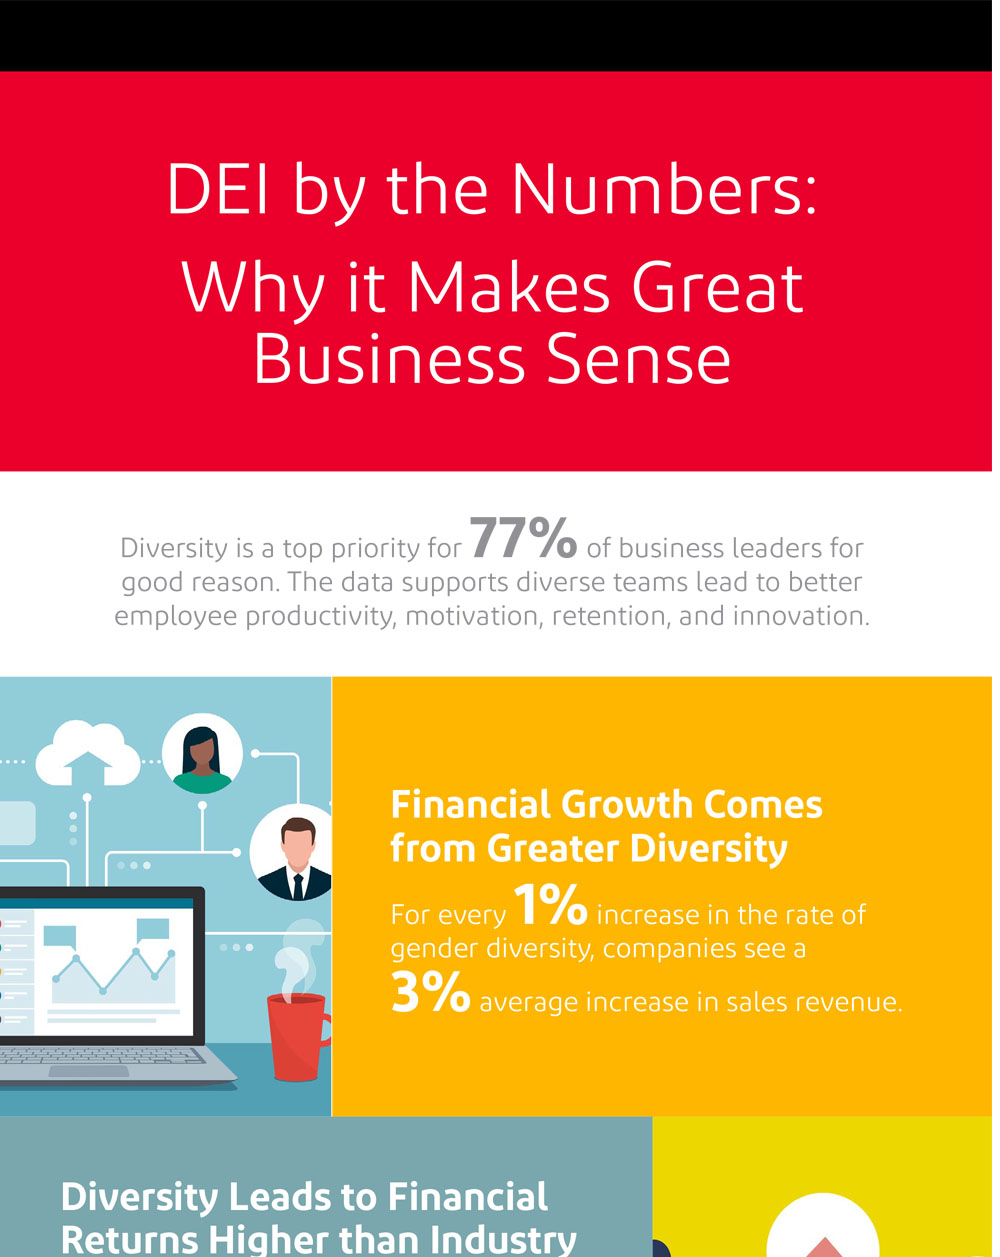 DEI by the Numbers: Why it Makes Great Business Sense